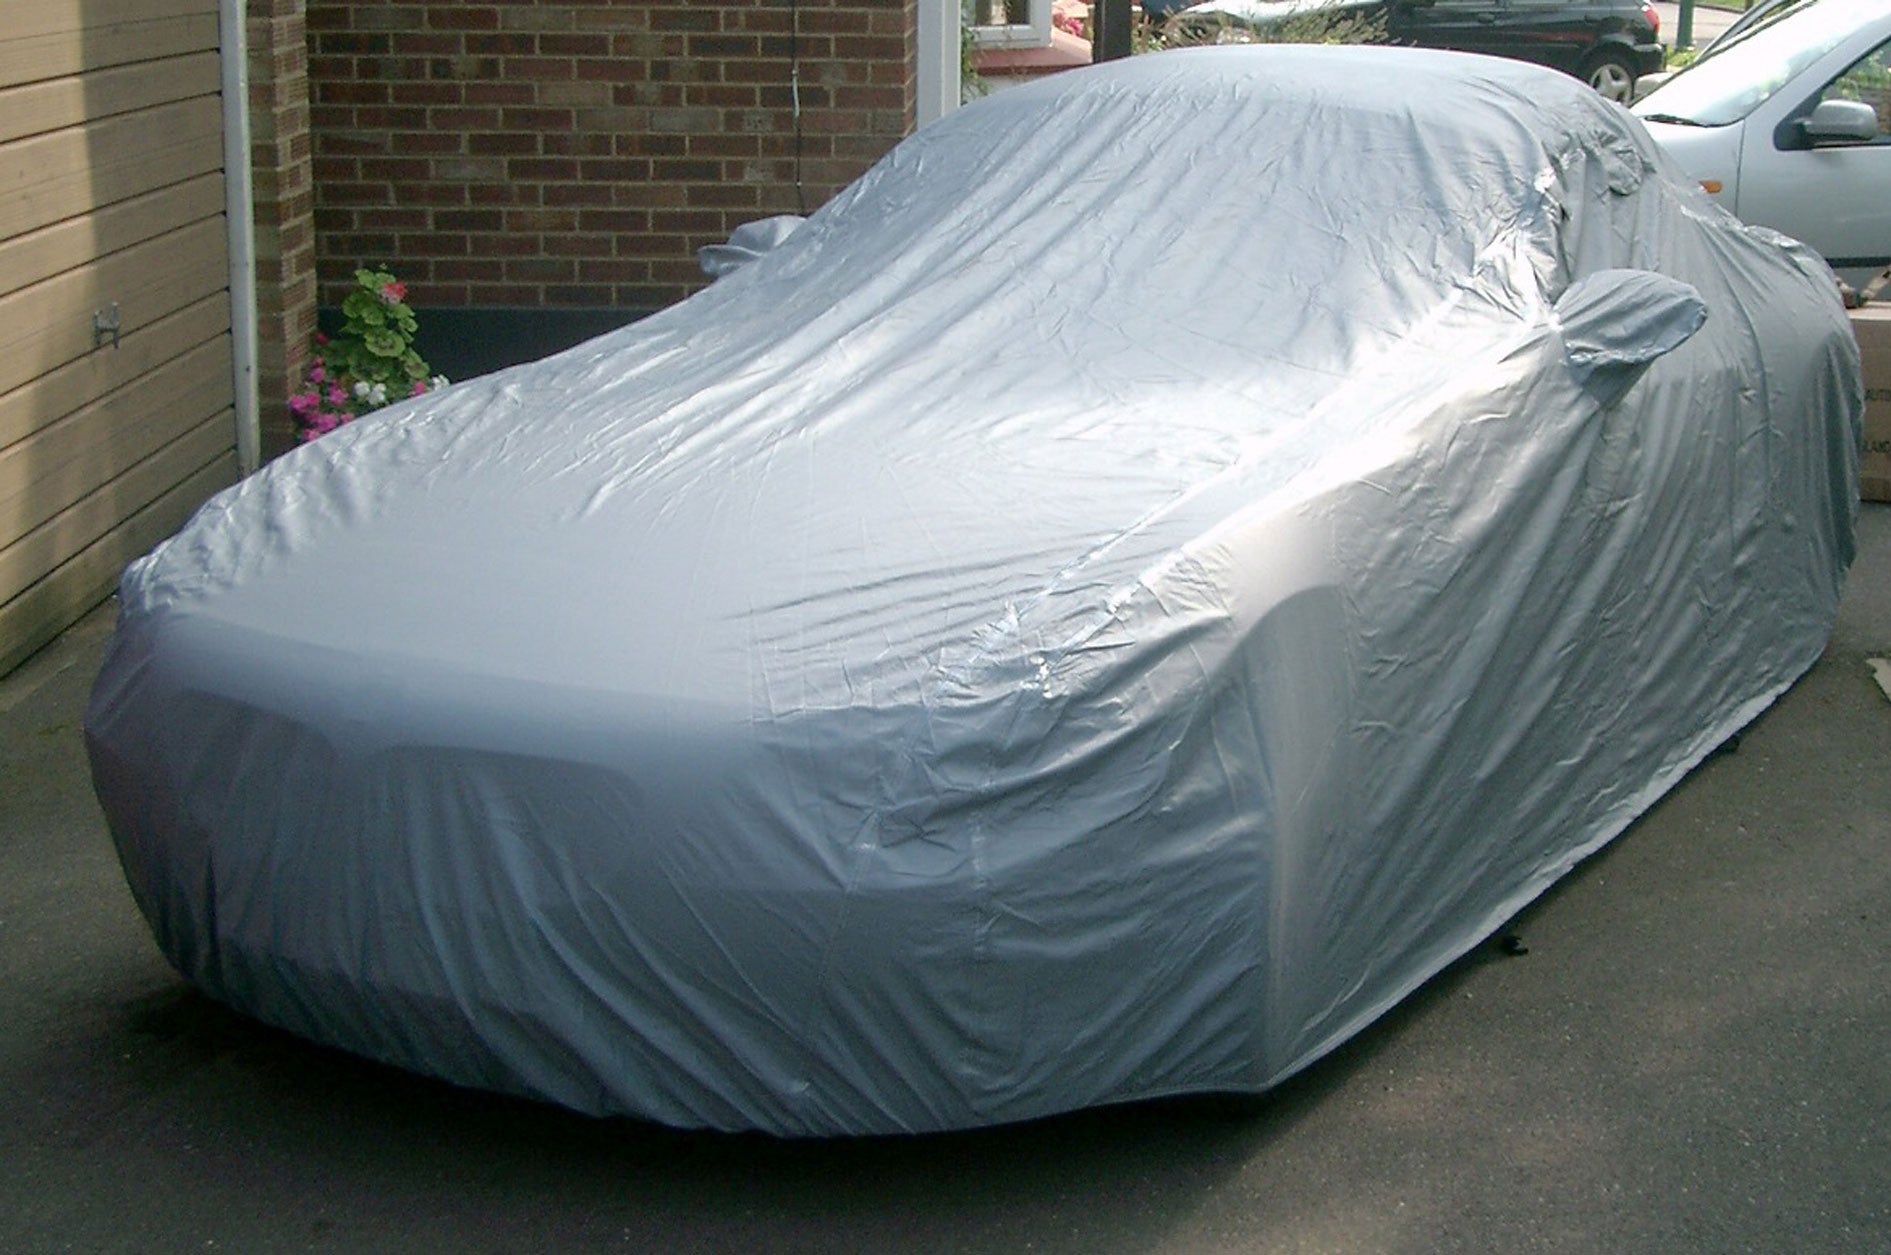 Monsoon outdoor waterproof winter car covers for VOLVO - Storm Car